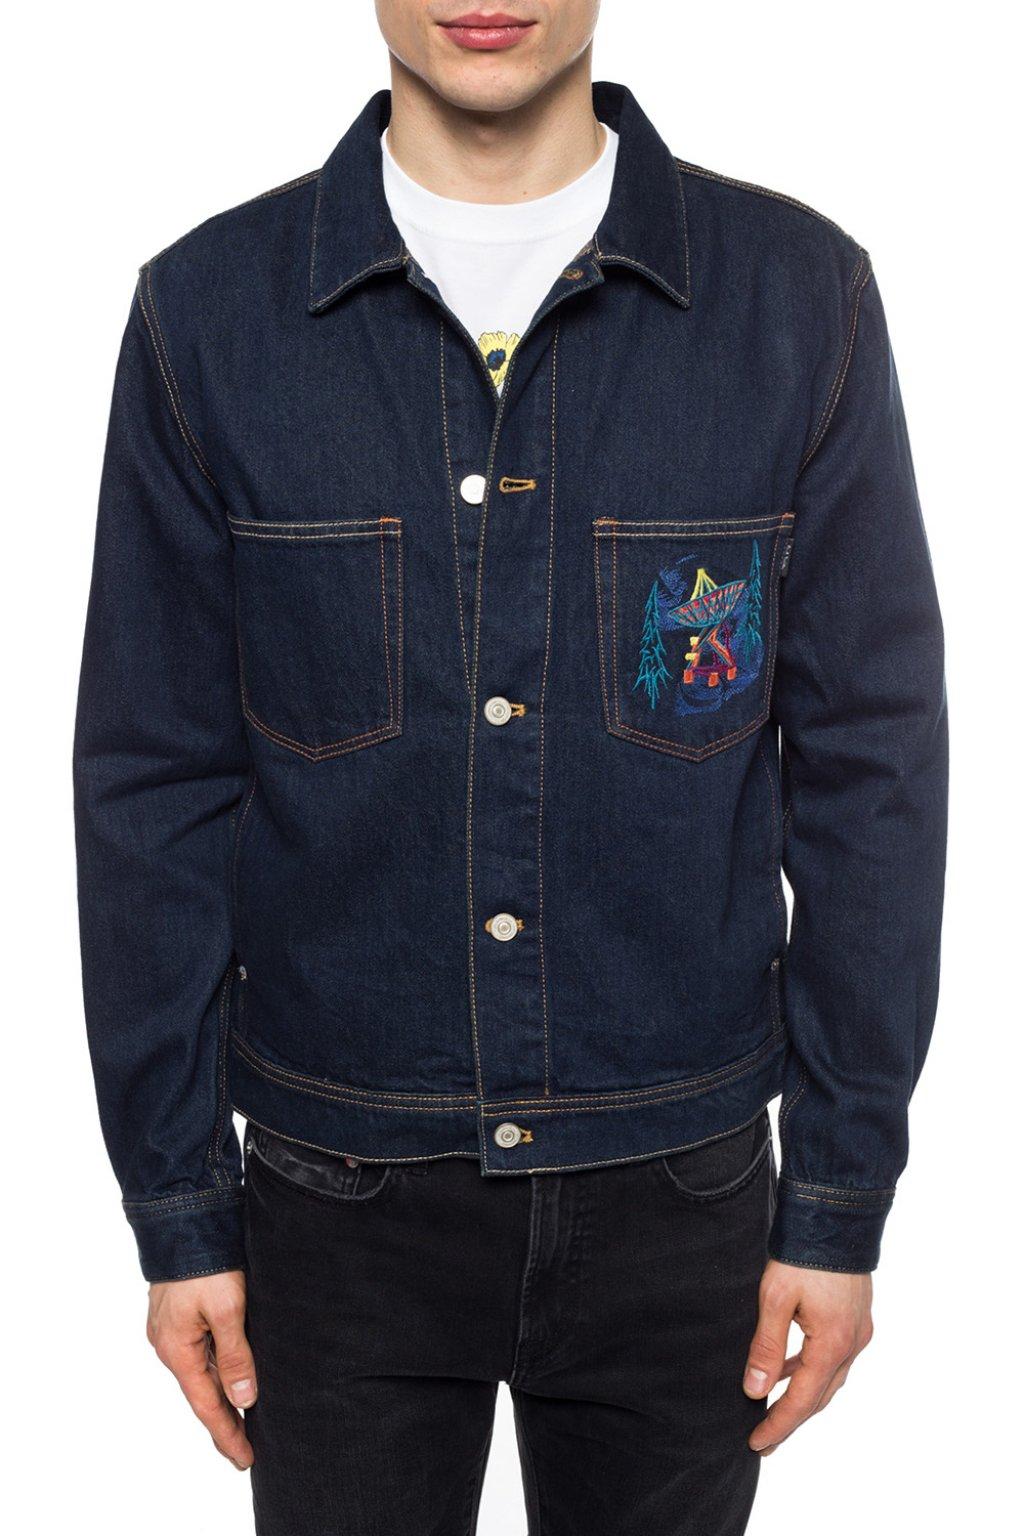 PS by Paul Smith Embroidered Denim Jacket in Navy Blue (Blue) for Men - Lyst